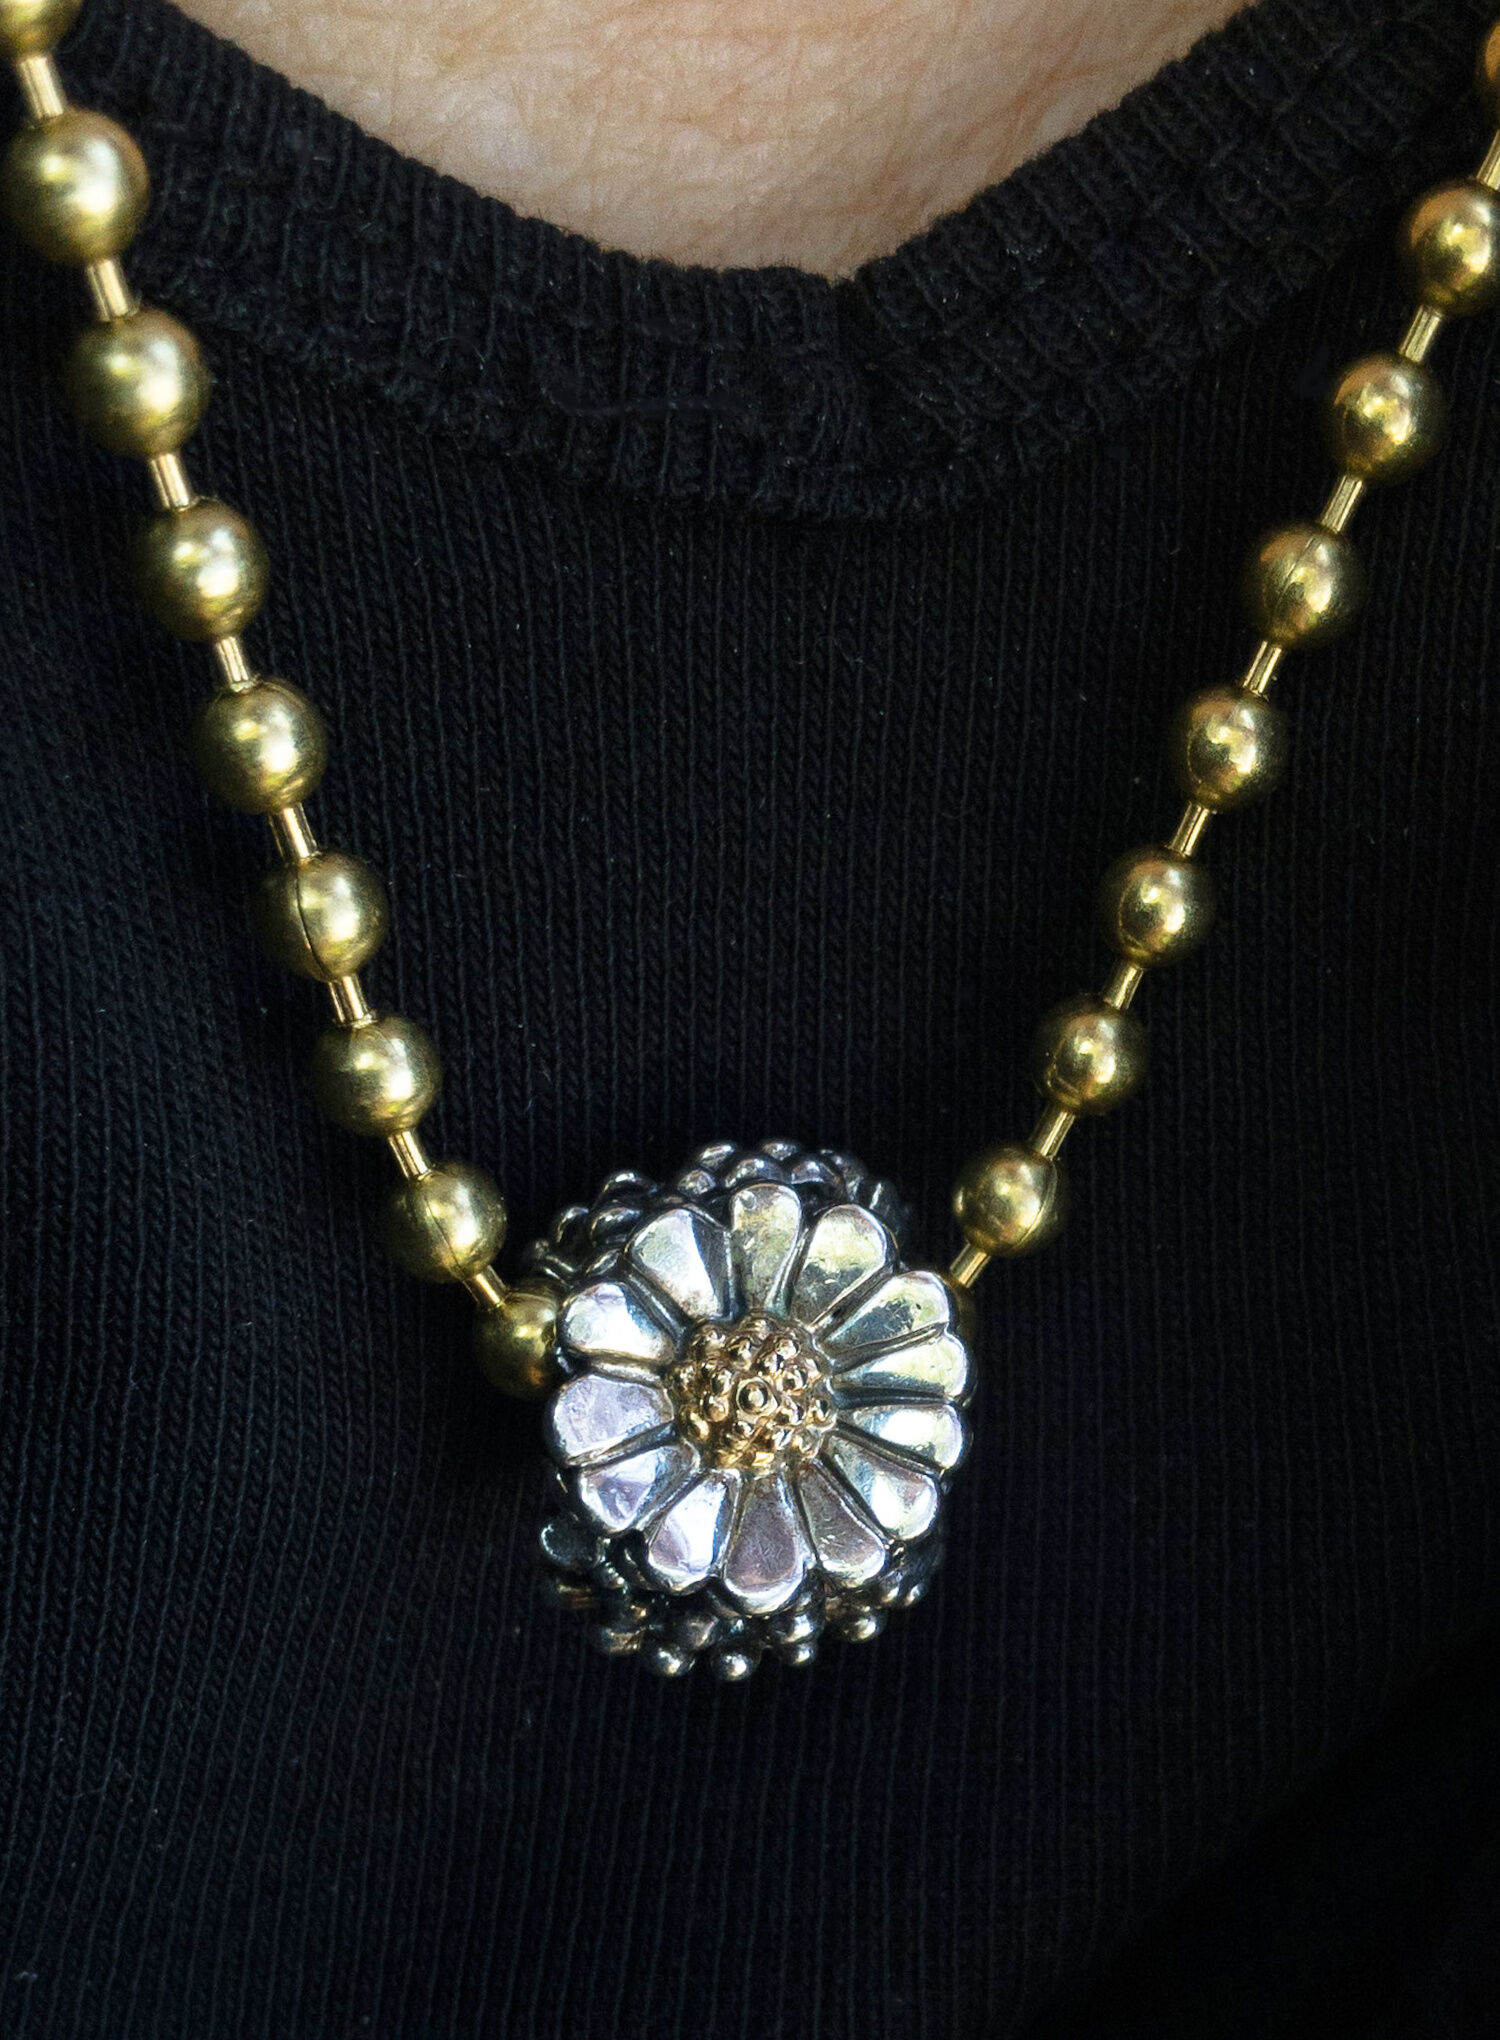 Trollbeads sterling silver and 18 karat gold "Daisy" bead on a gold-toned ball chain, worn as a necklace.